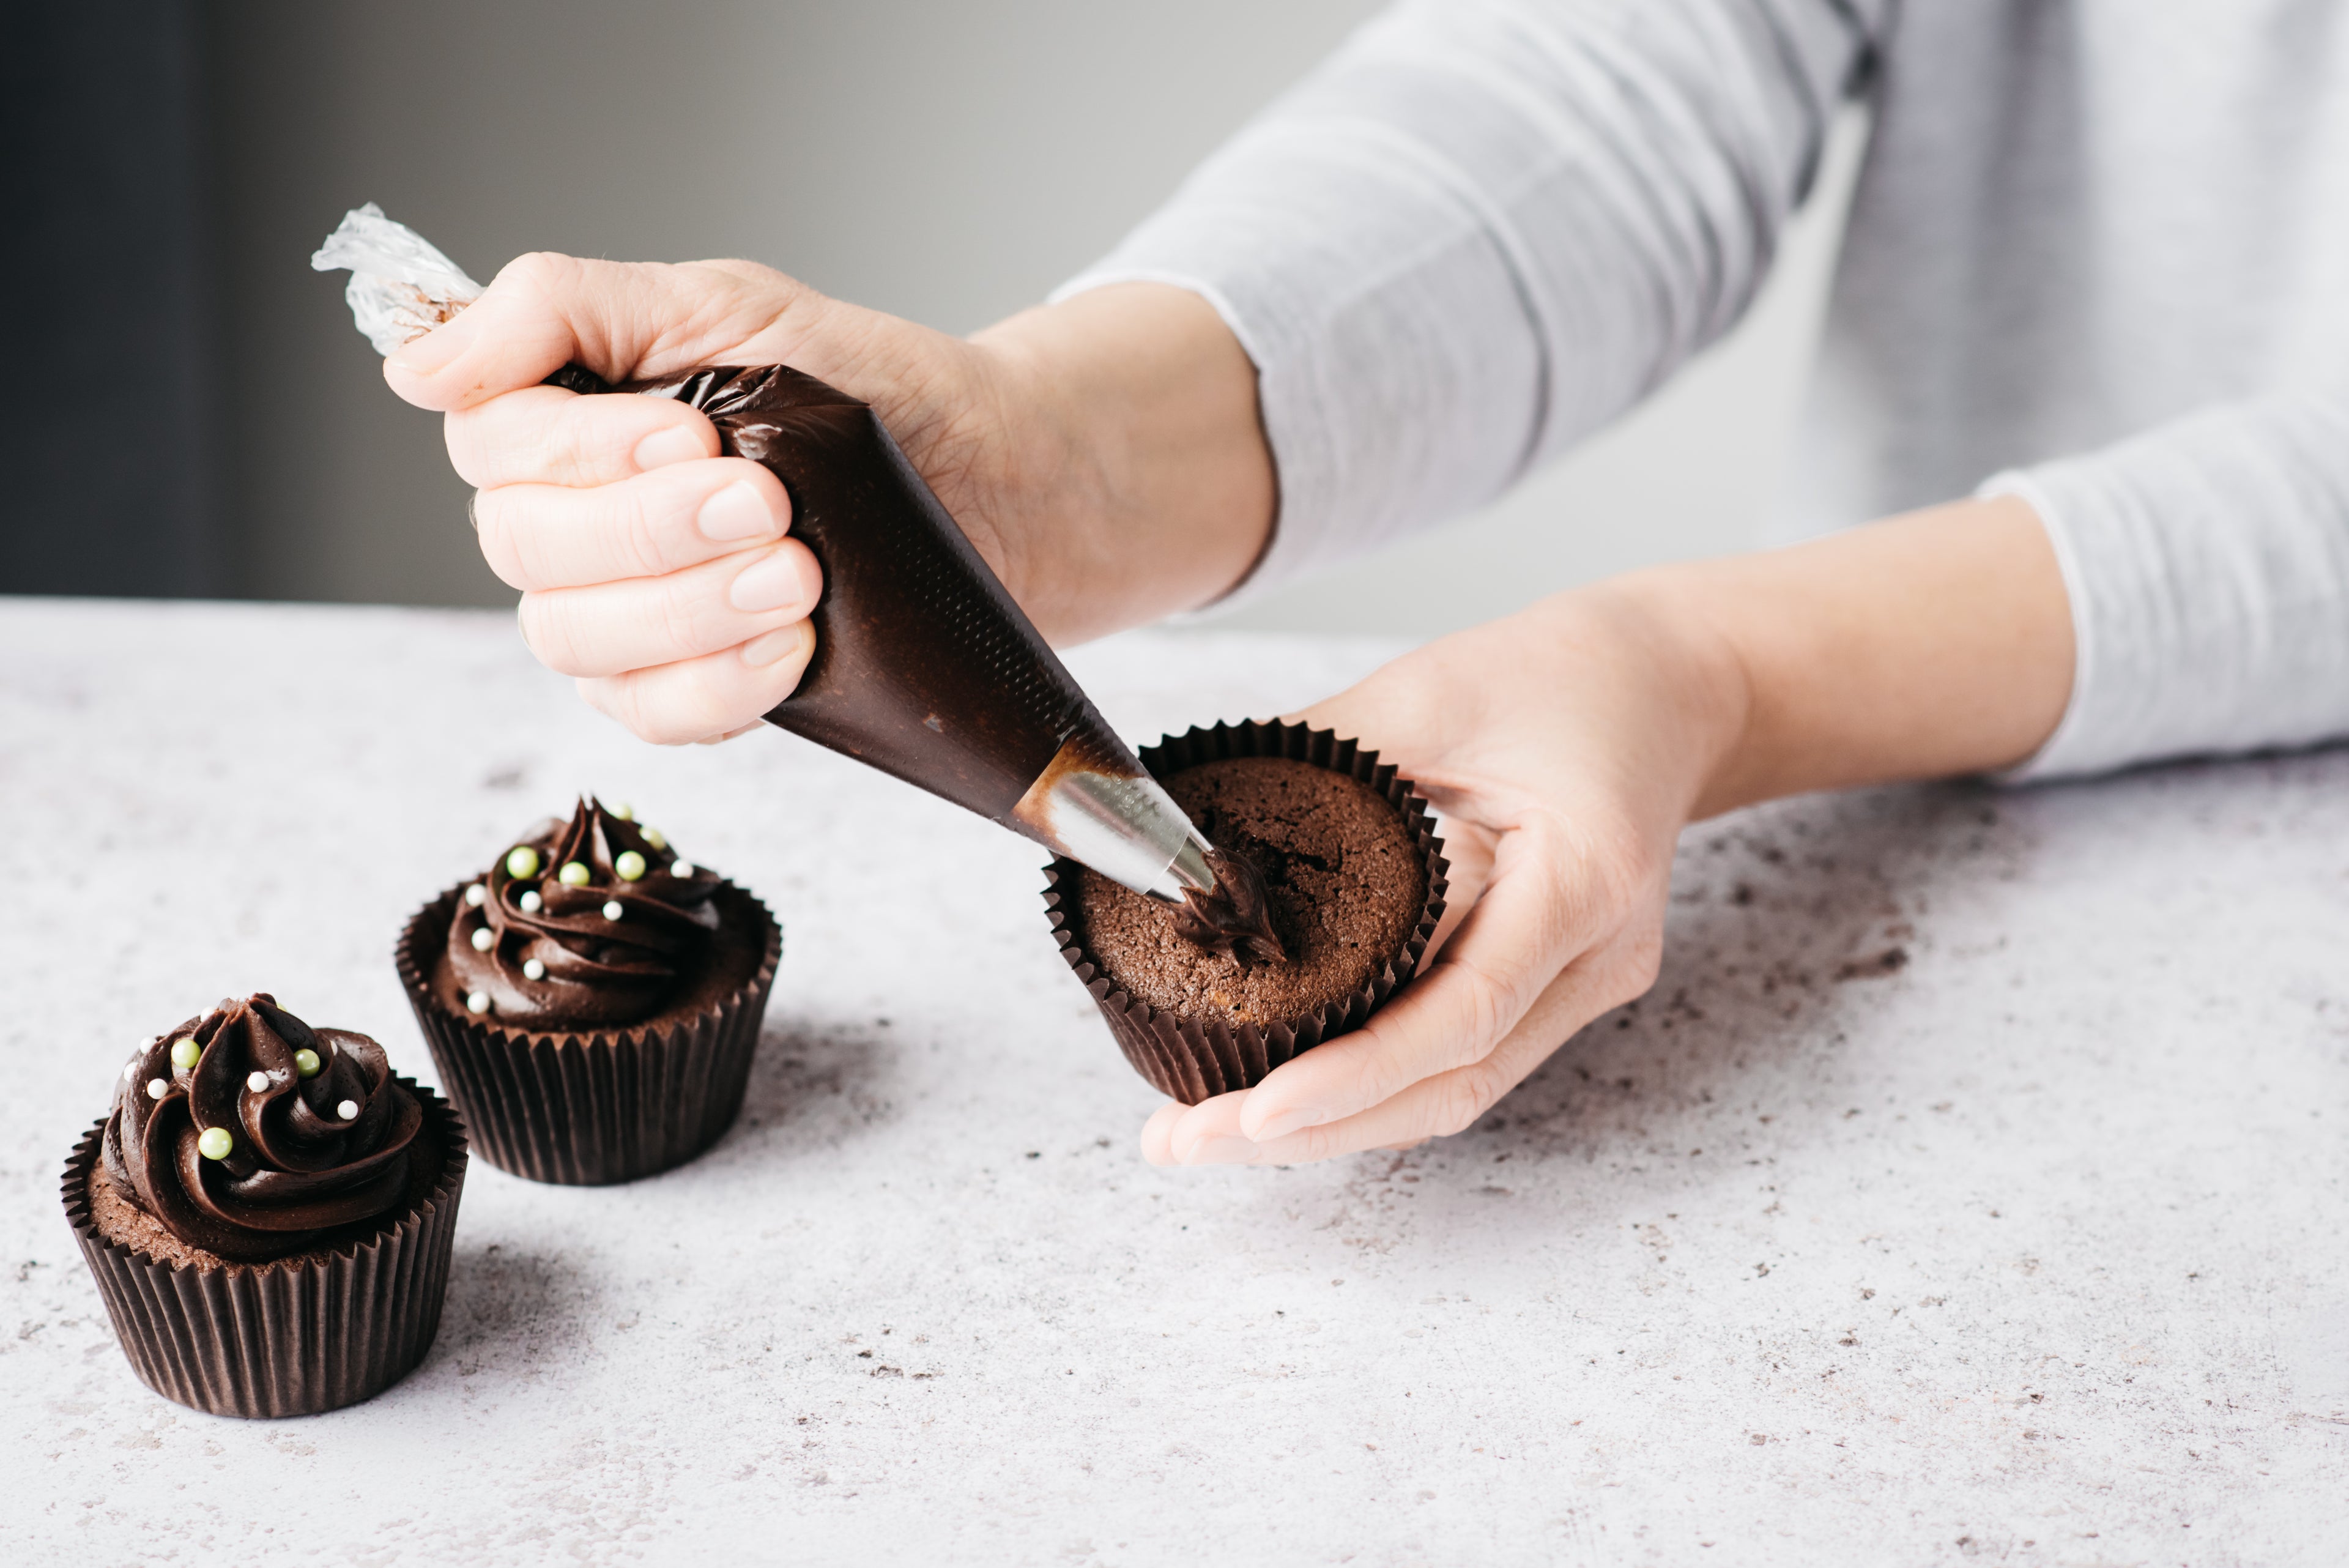 Chocolate buttercream being piped onto a chocolate cupcake